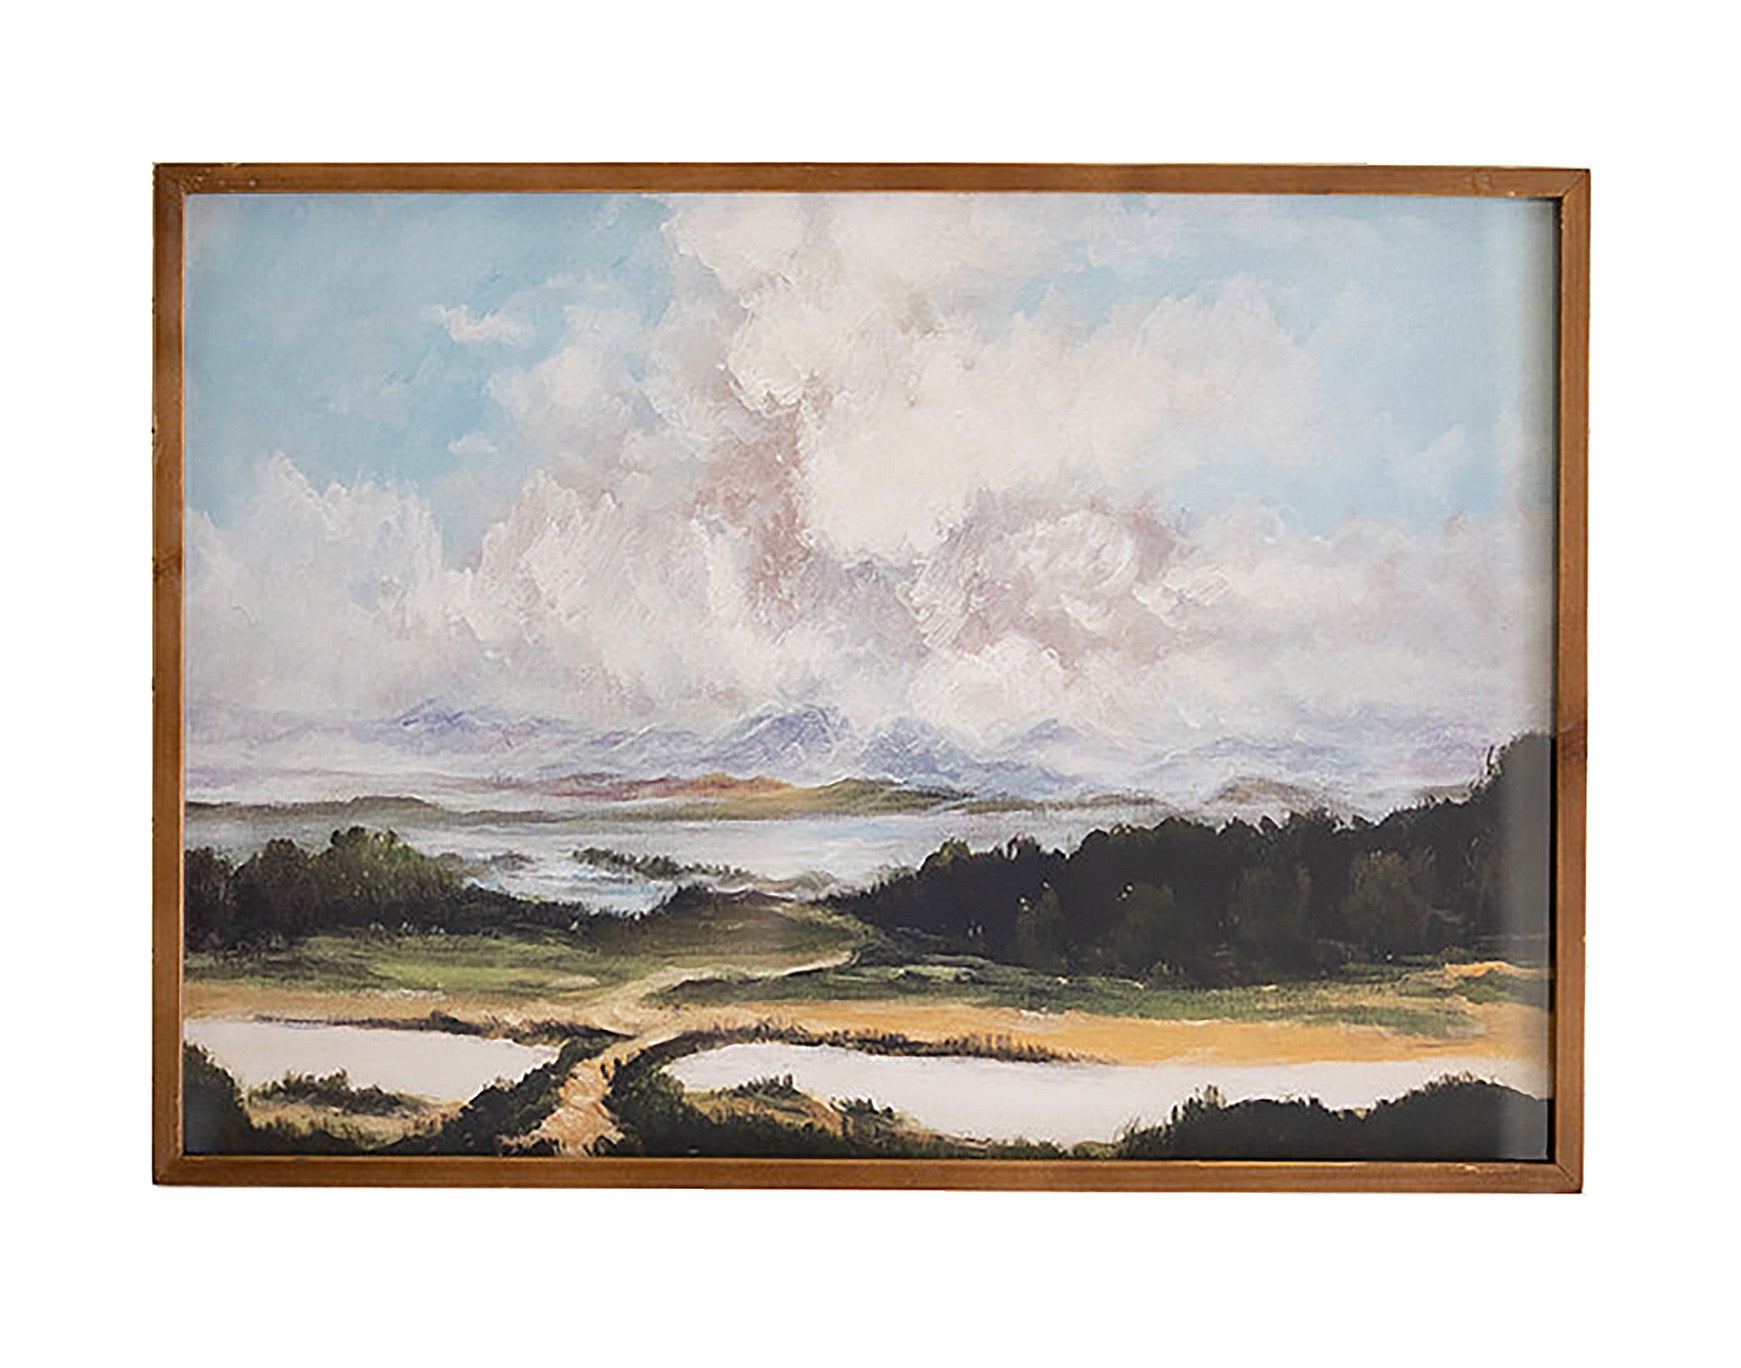 Framed Coastal Outdoor Art Print With Clouds & Trees